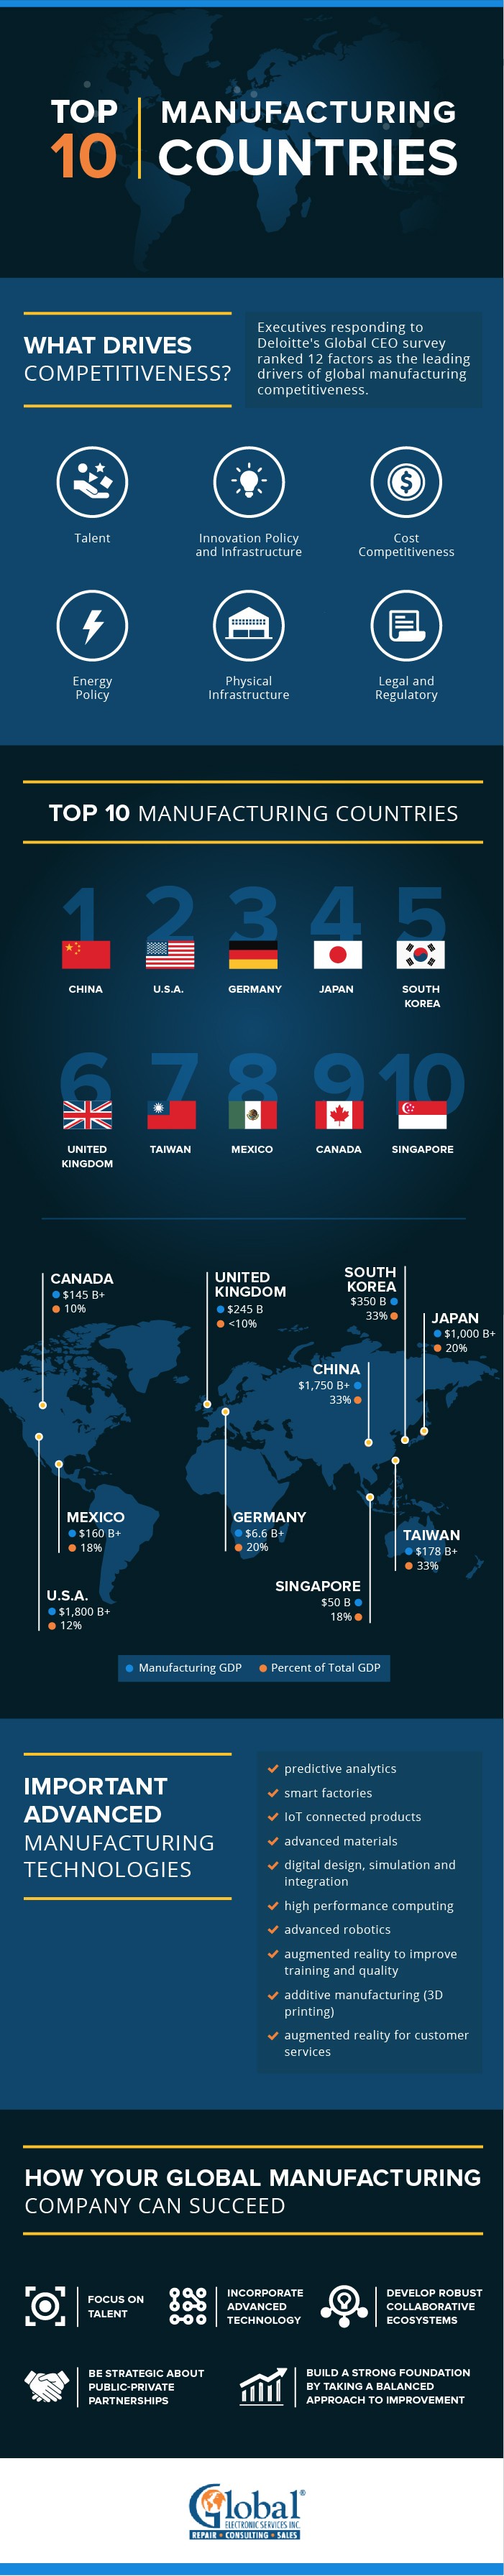 Top Manufacturing Countries 